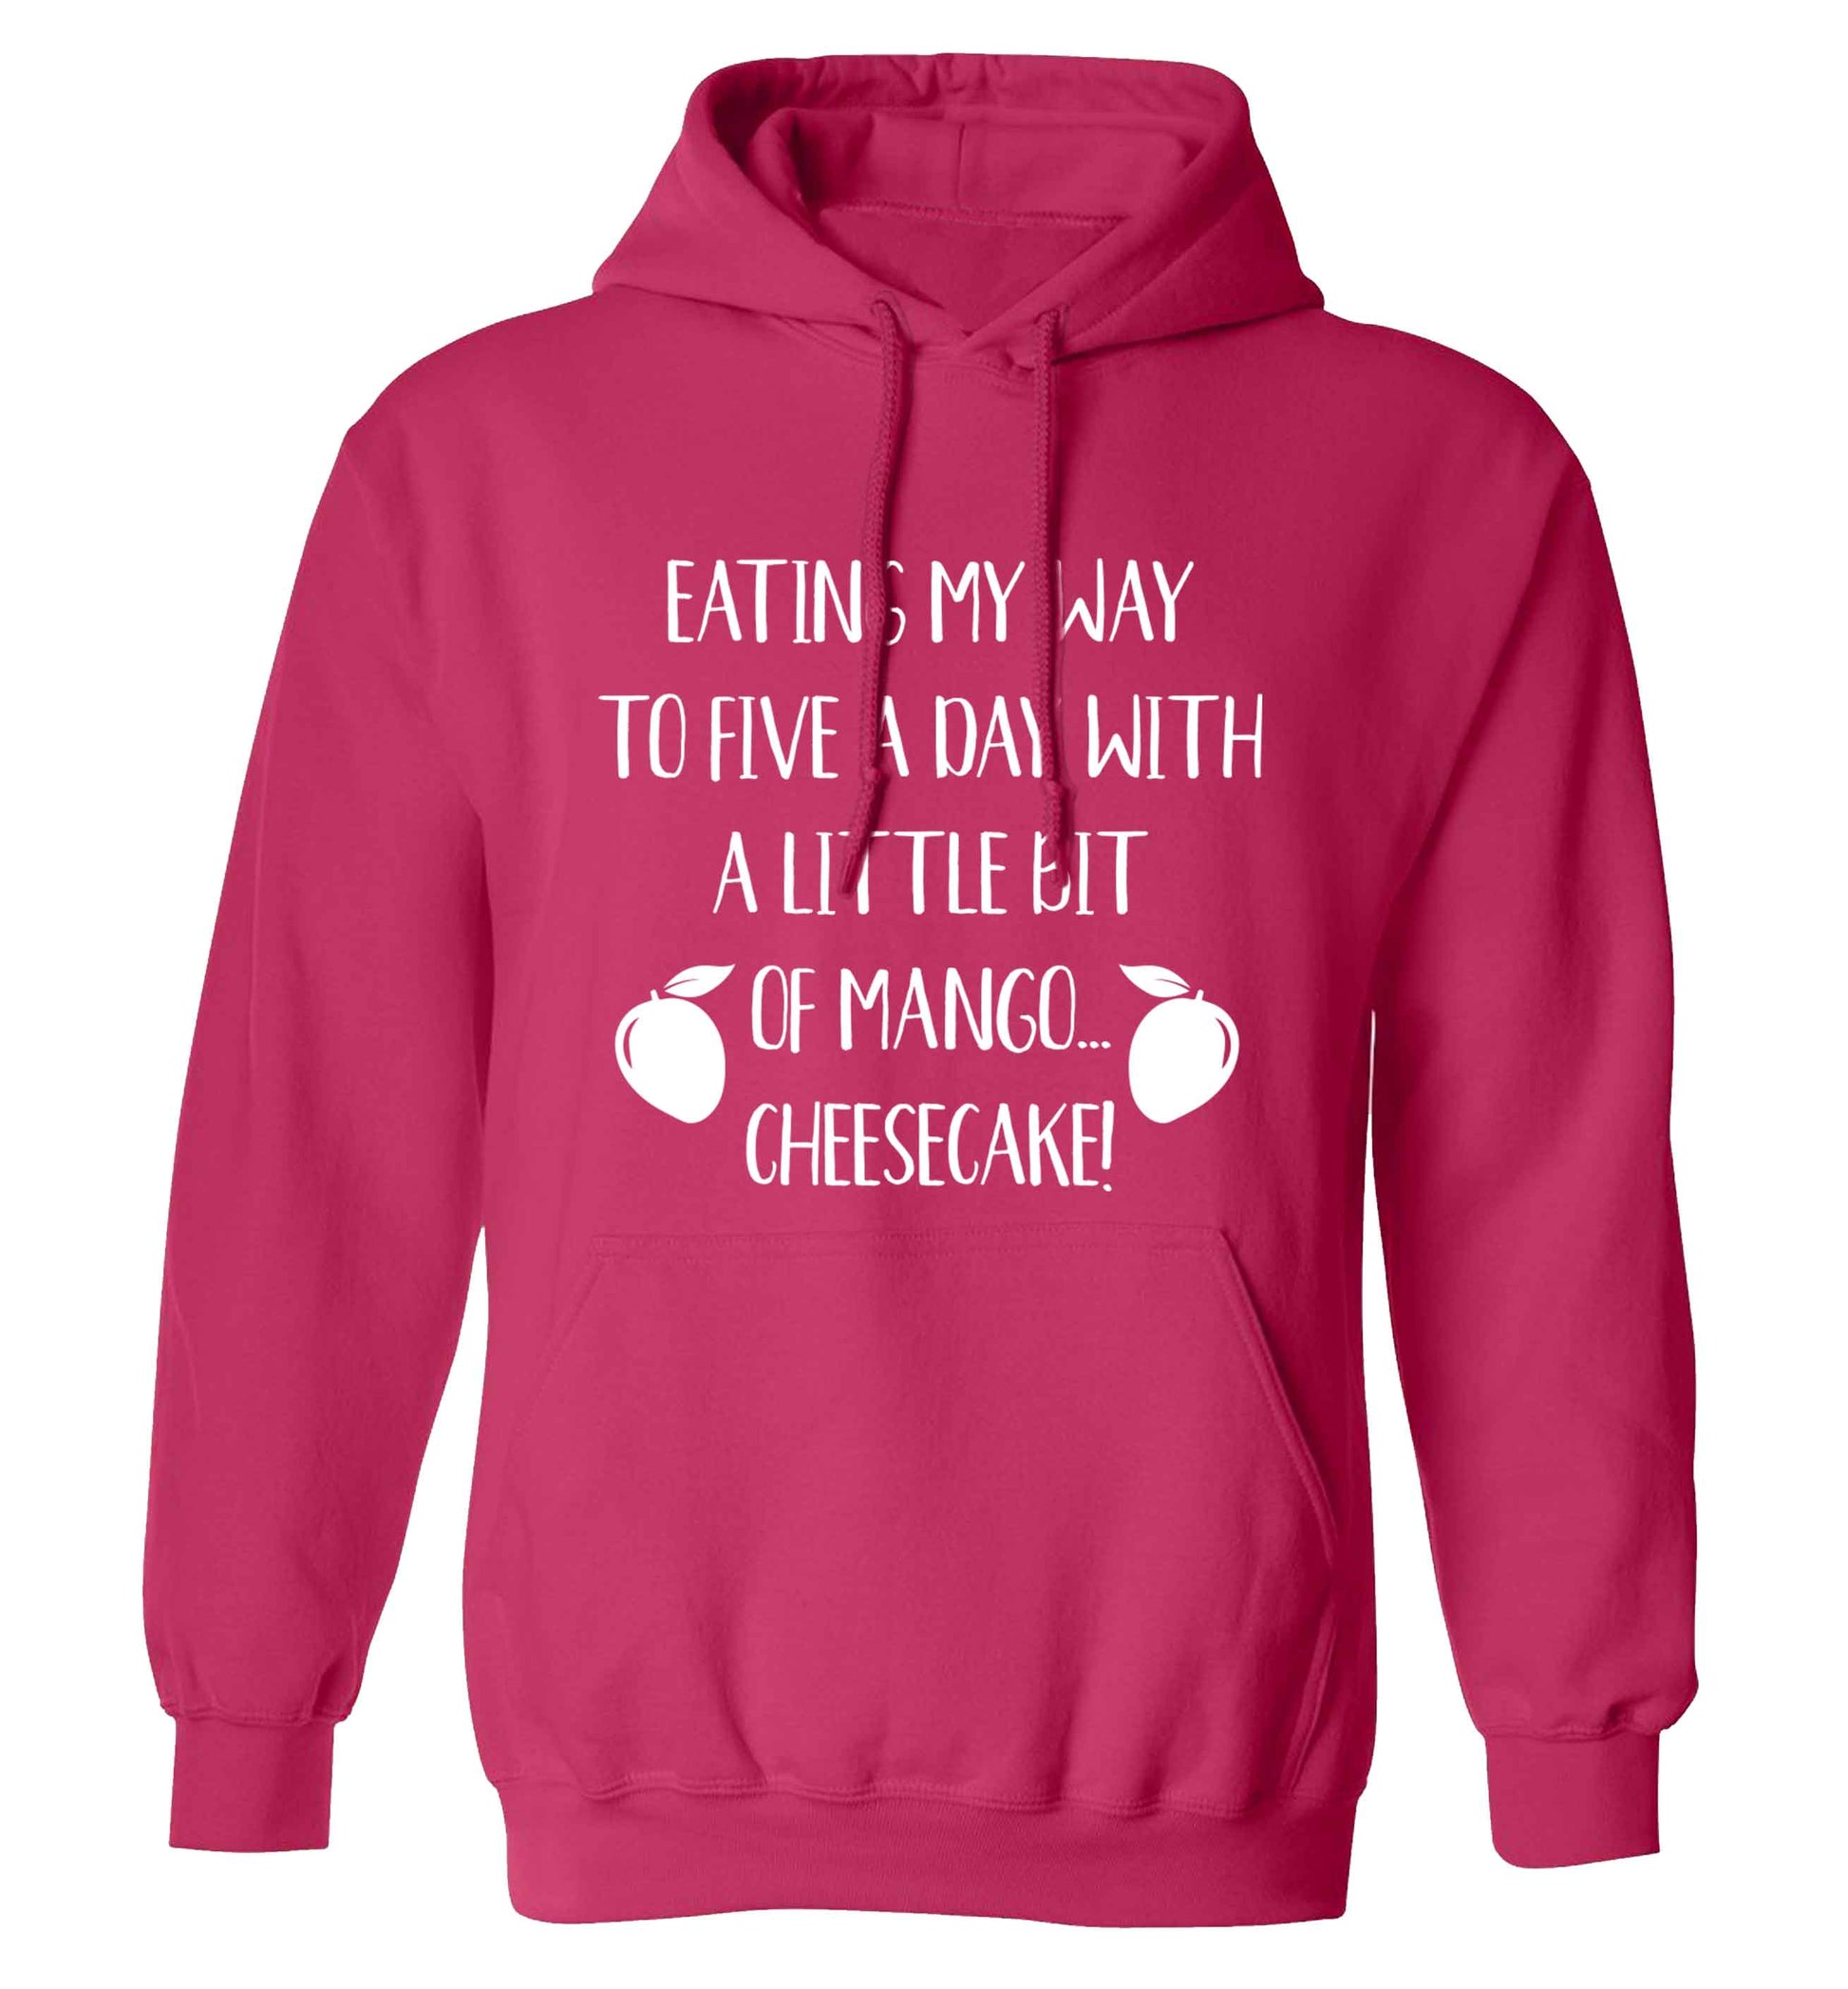 Eating my way to five a day with a little bit of mango cheesecake adults unisex pink hoodie 2XL